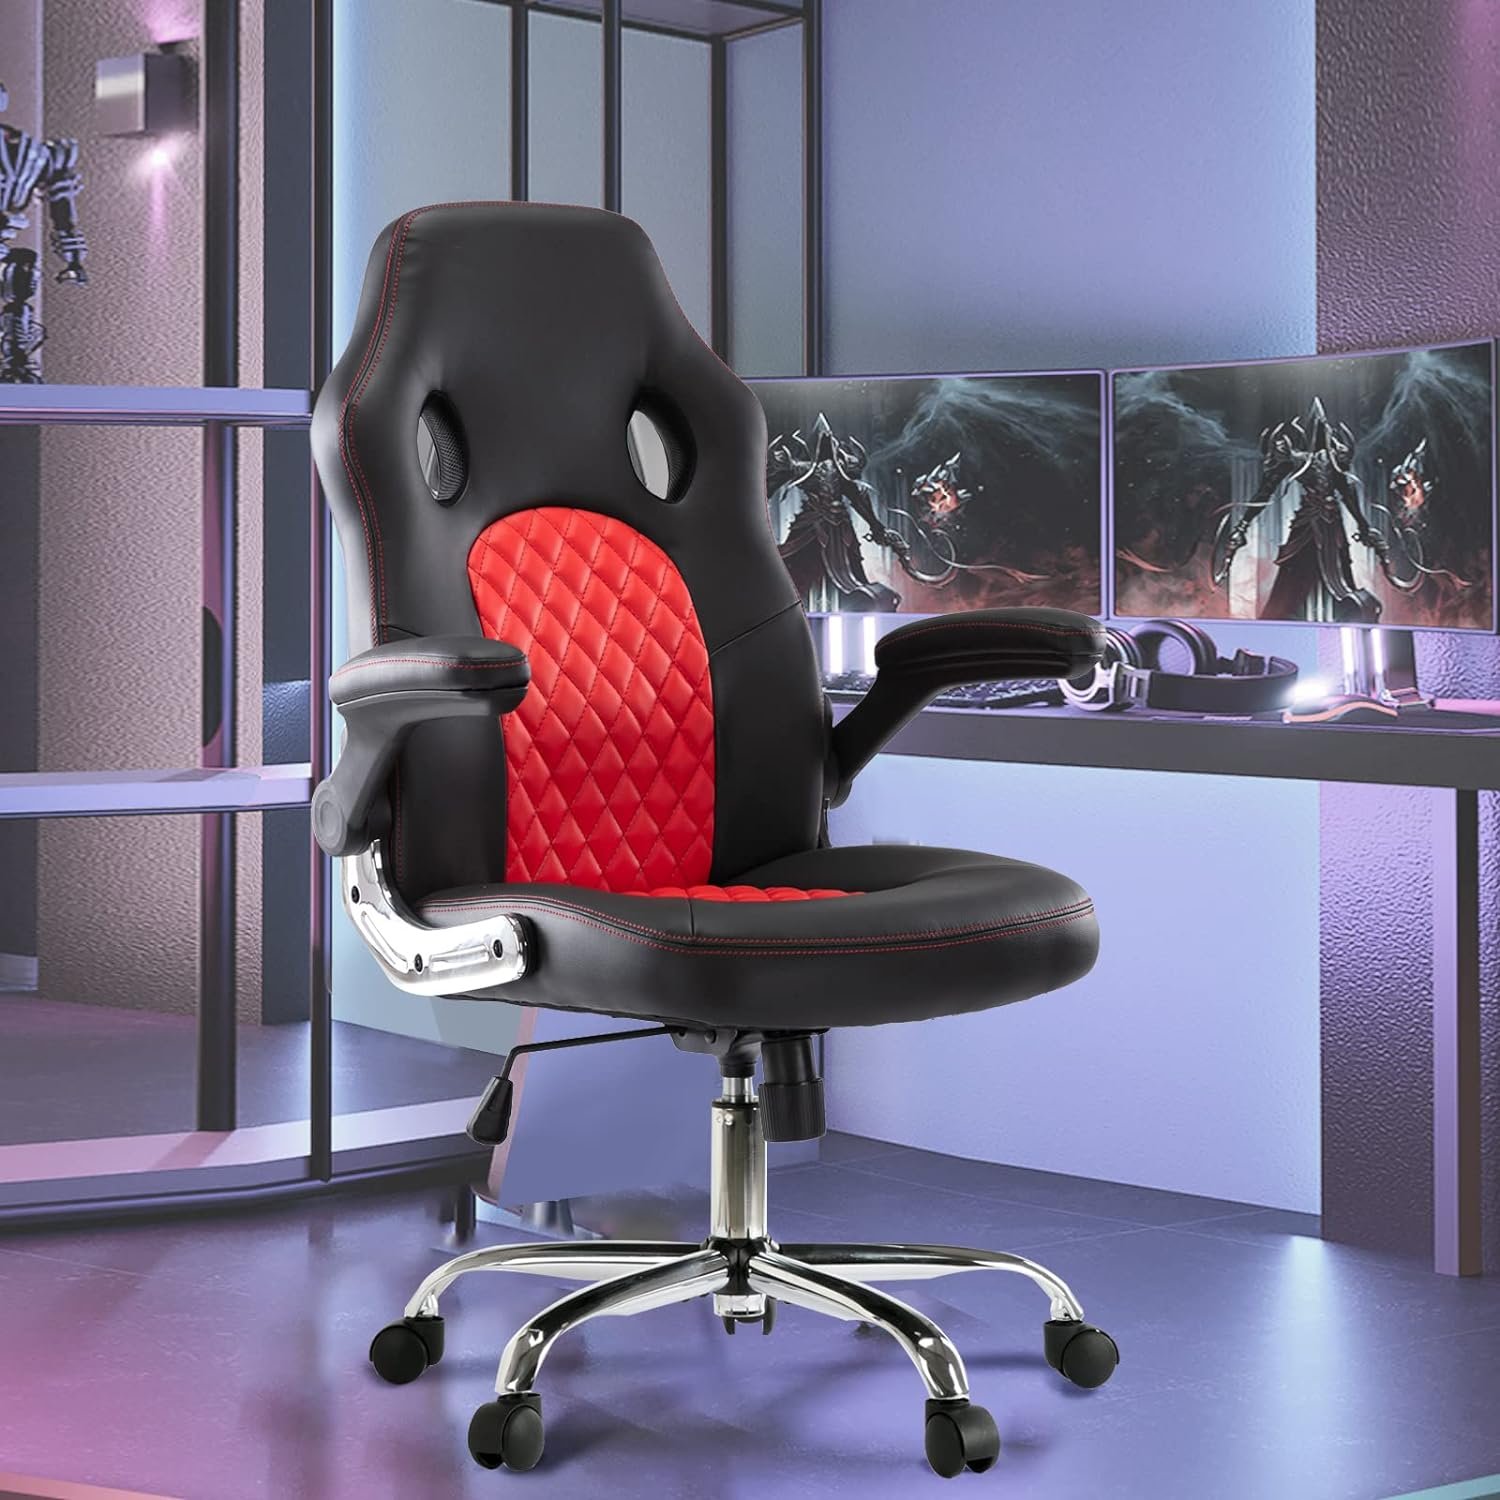 Gaming Office Chair - Ergonomic Executive Swivel Computer Desk Chair, High Back Adjustable Task Chair with Flip-up Armrests and Lumbar Support for Working, Studying, Gaming